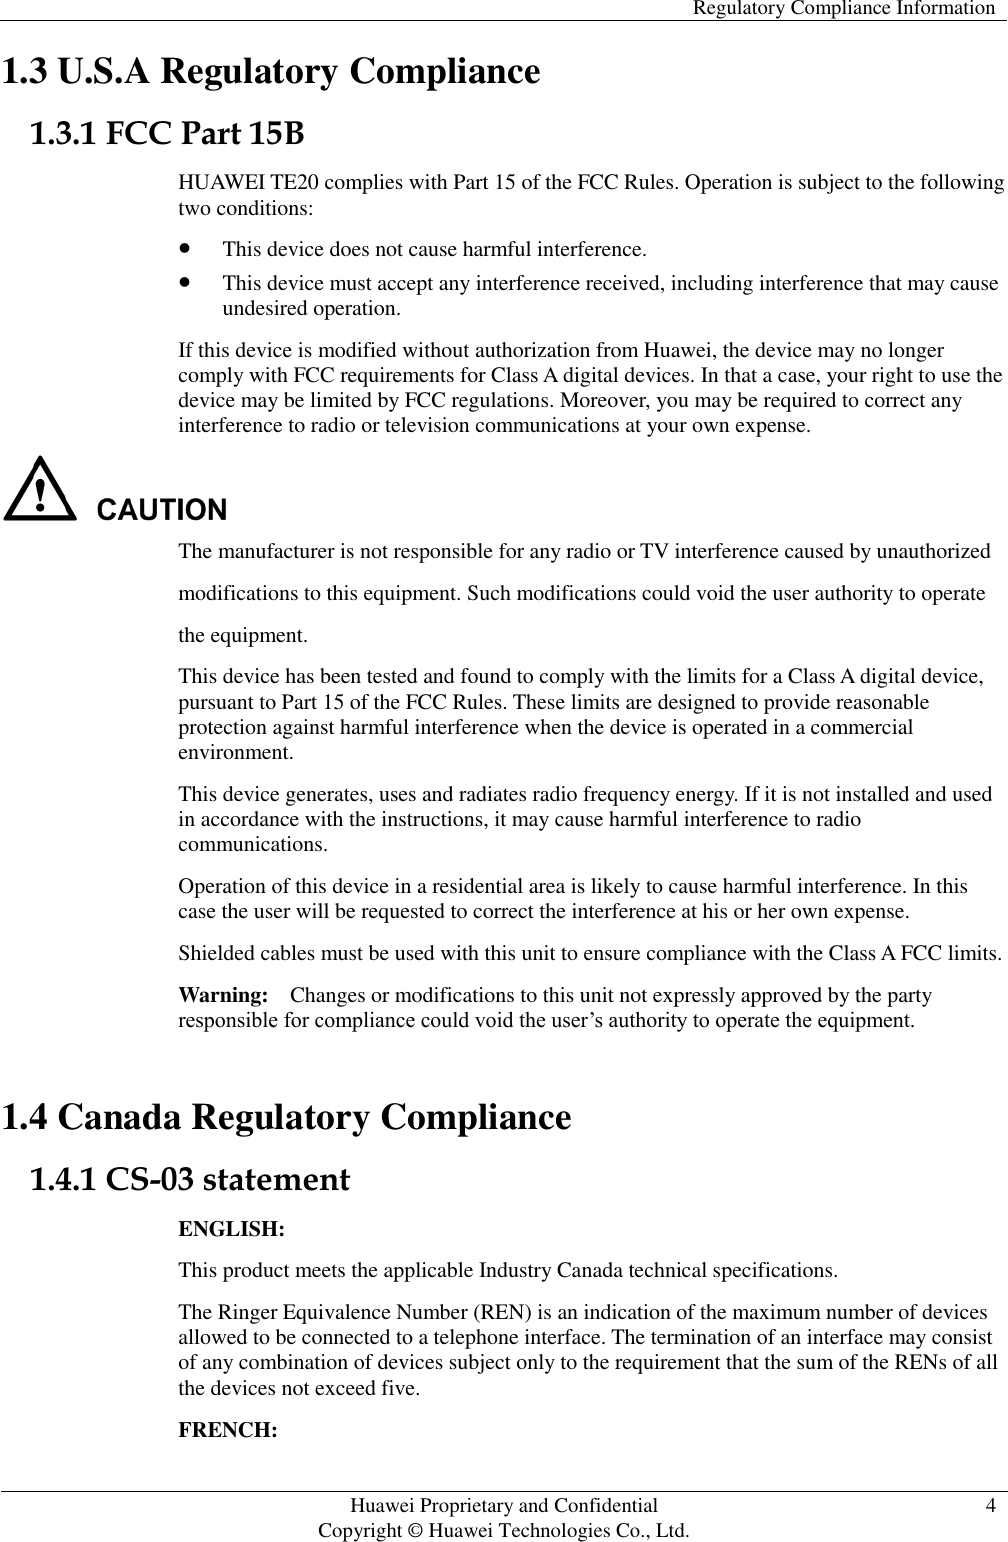   Regulatory Compliance Information   Huawei Proprietary and Confidential                                     Copyright © Huawei Technologies Co., Ltd. 4  1.3 U.S.A Regulatory Compliance 1.3.1 FCC Part 15B HUAWEI TE20 complies with Part 15 of the FCC Rules. Operation is subject to the following two conditions:  This device does not cause harmful interference.  This device must accept any interference received, including interference that may cause undesired operation. If this device is modified without authorization from Huawei, the device may no longer comply with FCC requirements for Class A digital devices. In that a case, your right to use the device may be limited by FCC regulations. Moreover, you may be required to correct any interference to radio or television communications at your own expense.  The manufacturer is not responsible for any radio or TV interference caused by unauthorized modifications to this equipment. Such modifications could void the user authority to operate the equipment. This device has been tested and found to comply with the limits for a Class A digital device, pursuant to Part 15 of the FCC Rules. These limits are designed to provide reasonable protection against harmful interference when the device is operated in a commercial environment. This device generates, uses and radiates radio frequency energy. If it is not installed and used in accordance with the instructions, it may cause harmful interference to radio communications. Operation of this device in a residential area is likely to cause harmful interference. In this case the user will be requested to correct the interference at his or her own expense. Shielded cables must be used with this unit to ensure compliance with the Class A FCC limits. Warning:  Changes or modifications to this unit not expressly approved by the party responsible for compliance could void the user’s authority to operate the equipment. 1.4 Canada Regulatory Compliance 1.4.1 CS-03 statement ENGLISH: This product meets the applicable Industry Canada technical specifications.   The Ringer Equivalence Number (REN) is an indication of the maximum number of devices allowed to be connected to a telephone interface. The termination of an interface may consist of any combination of devices subject only to the requirement that the sum of the RENs of all the devices not exceed five. FRENCH: 